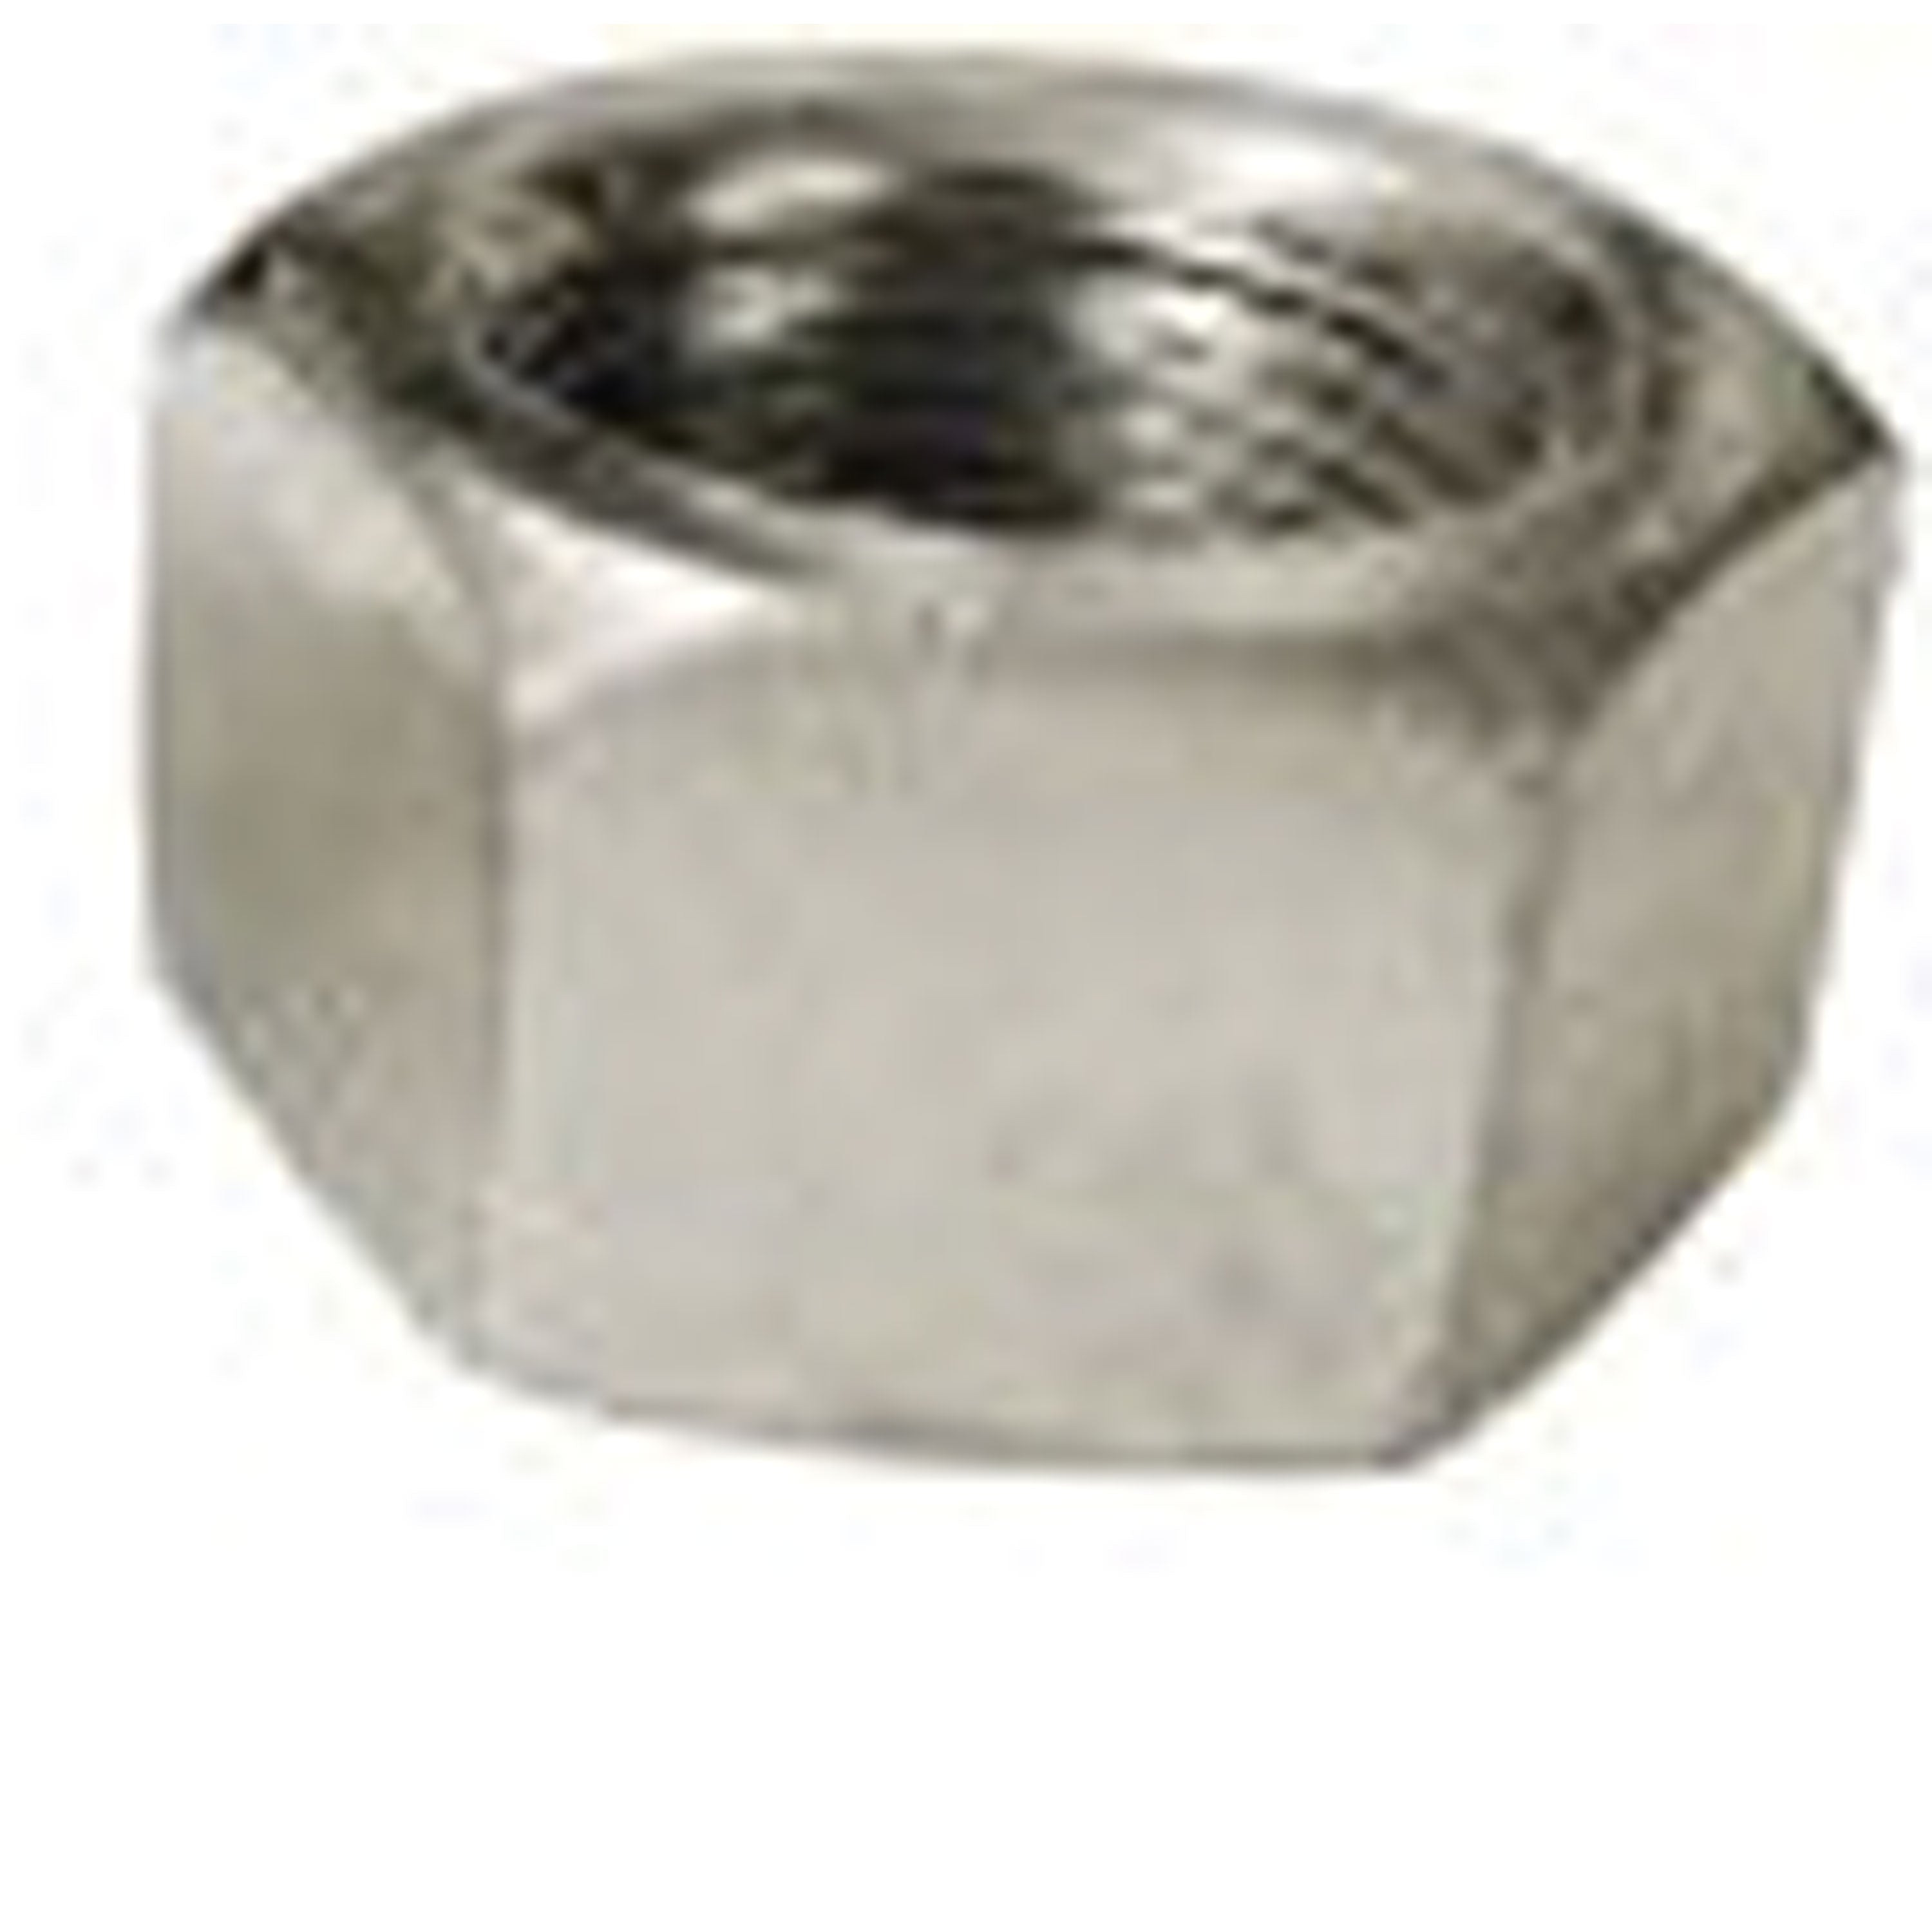 C.R. Brophy 2907 Hitch Ball Replacement Parts - 3/4" Zinc NF Hex Nut